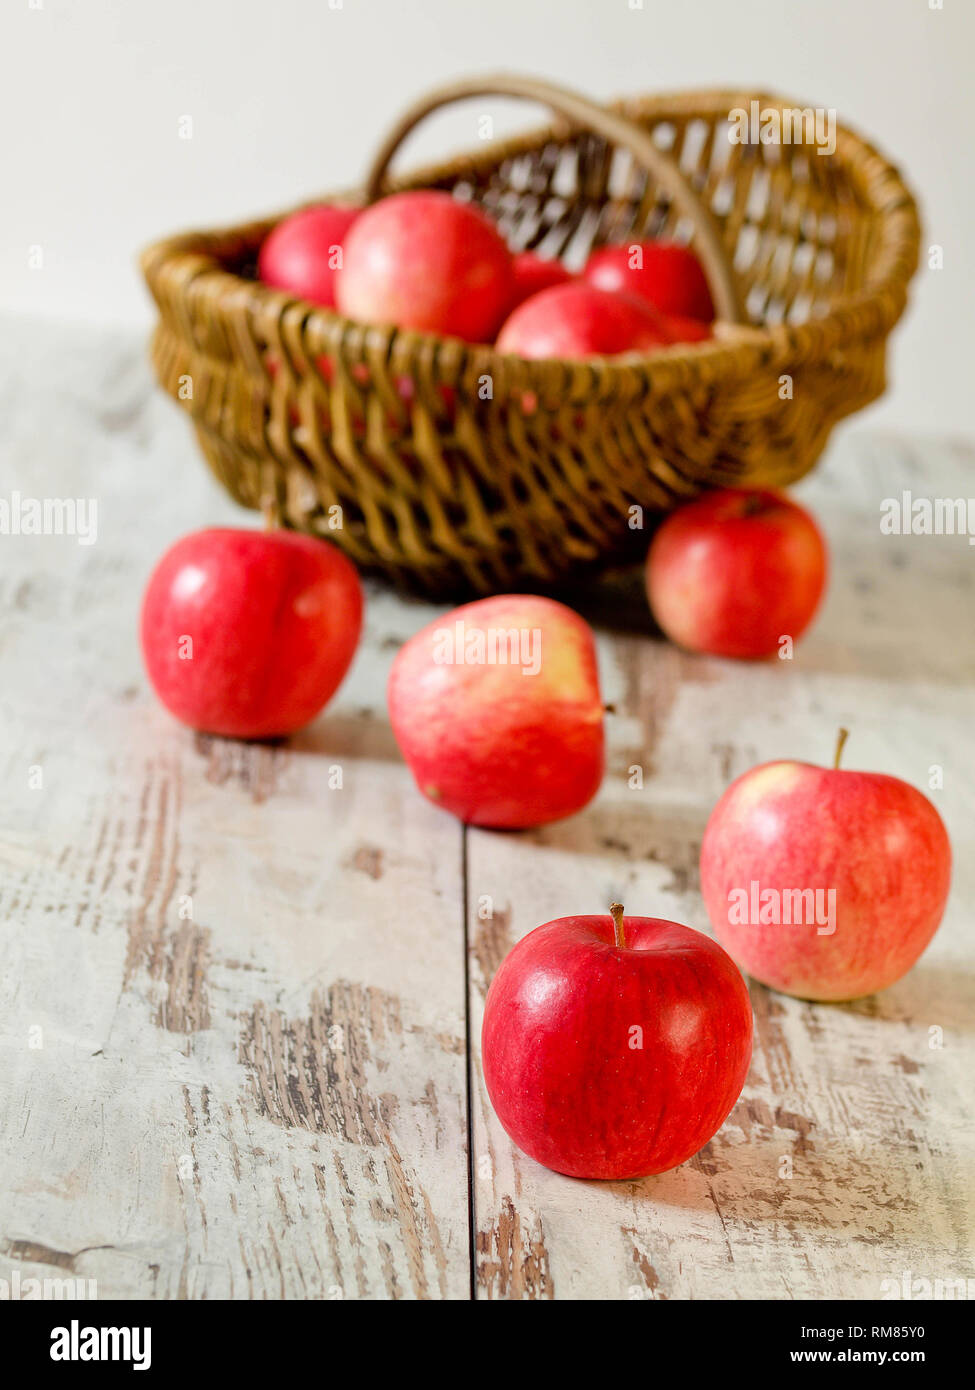 Delicious fresh apple - juicy red apples Stock Photo